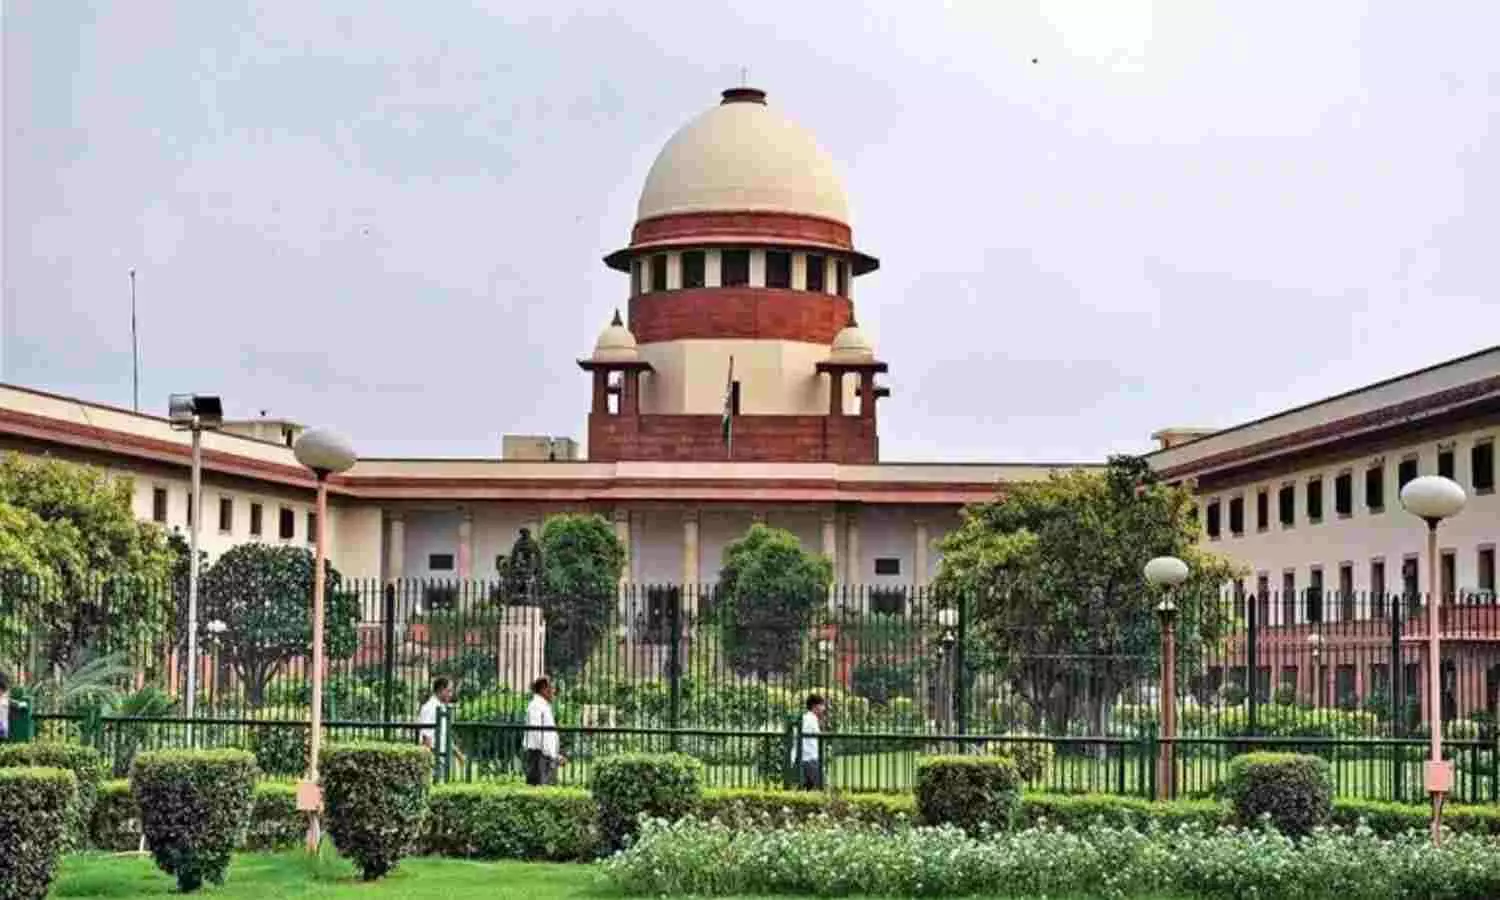 Govt cannot be held liable for deaths due to COVID-19 vaccination: Centre tells SC